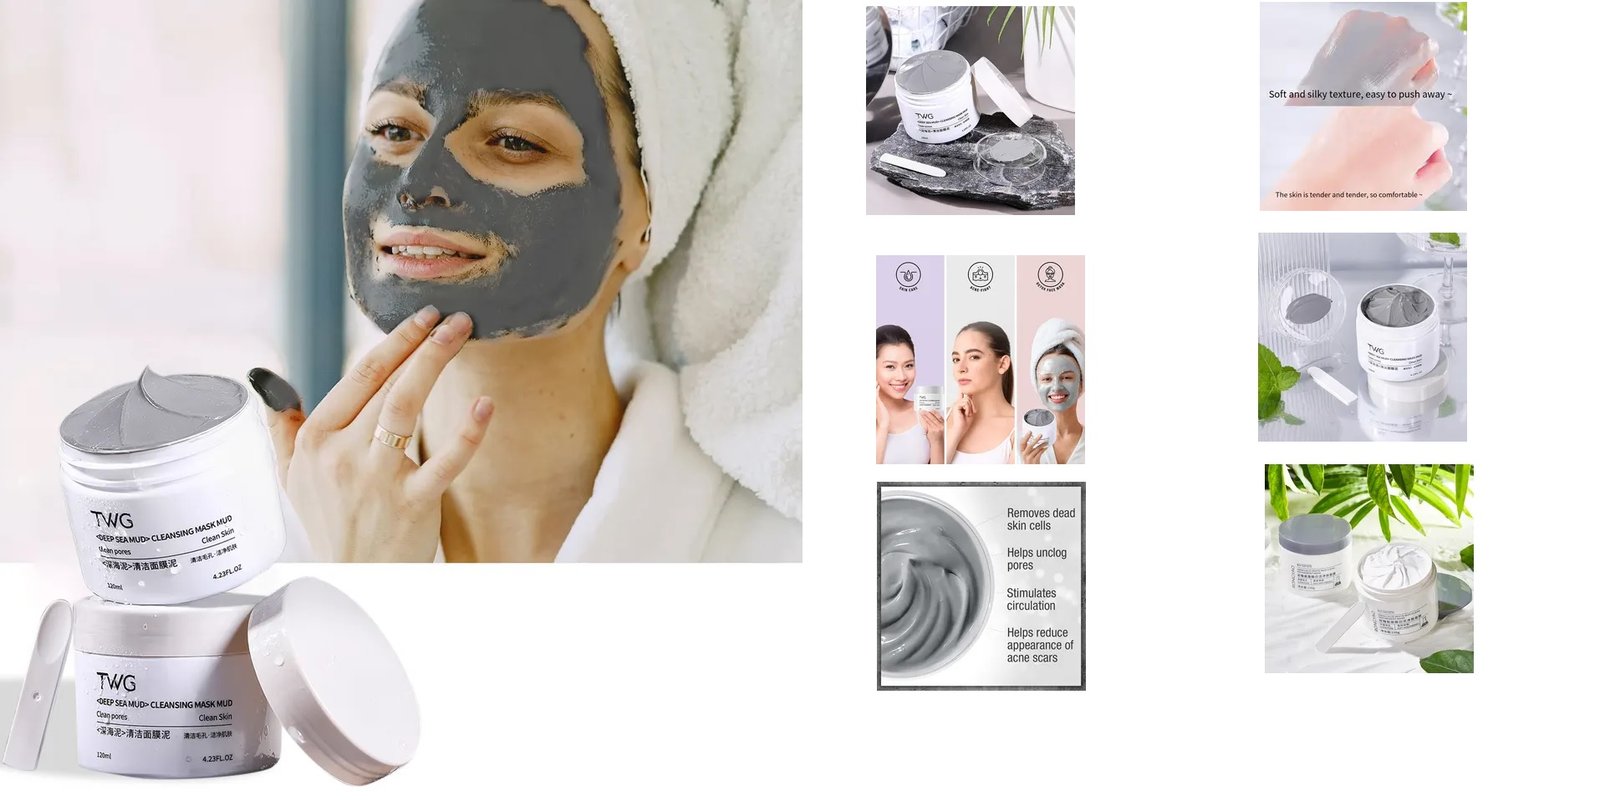 TWG Dead Sea Mud Spa Quality Pore Reducer for Acne Blackheads and Oily Skin Black Face Clap Dead Sea Mud Mask for Face